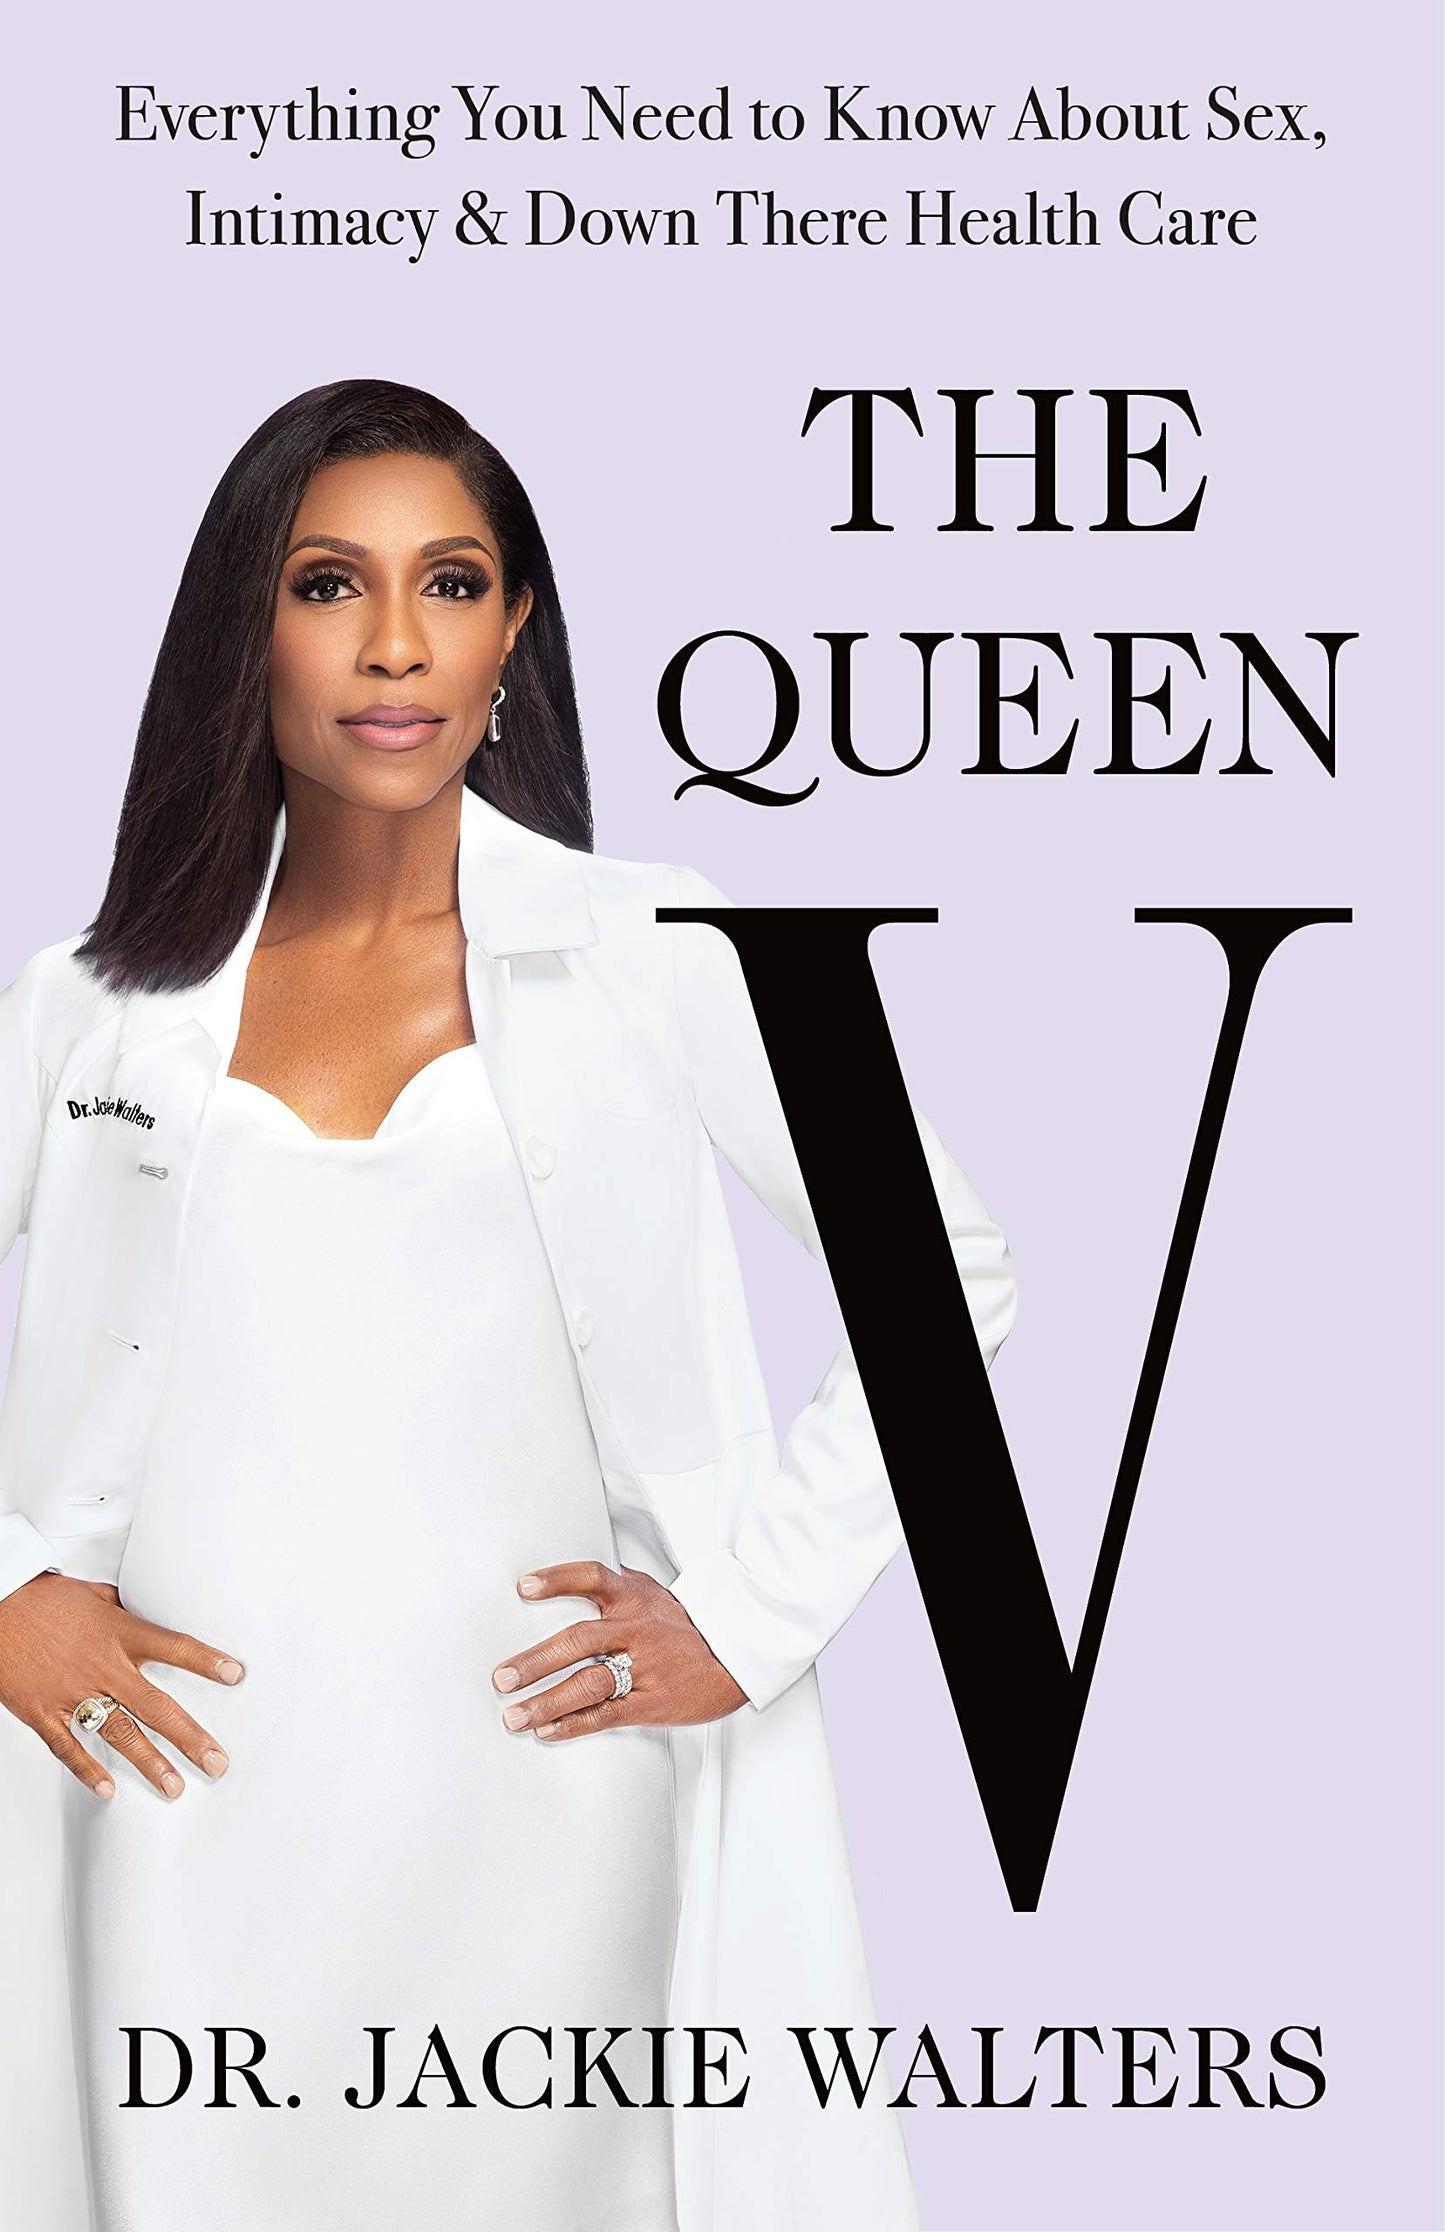 The Queen V: What No One Ever Tells You (but Everyone Needs to Know) About Intimacy, Sex, and Down-There Health Care